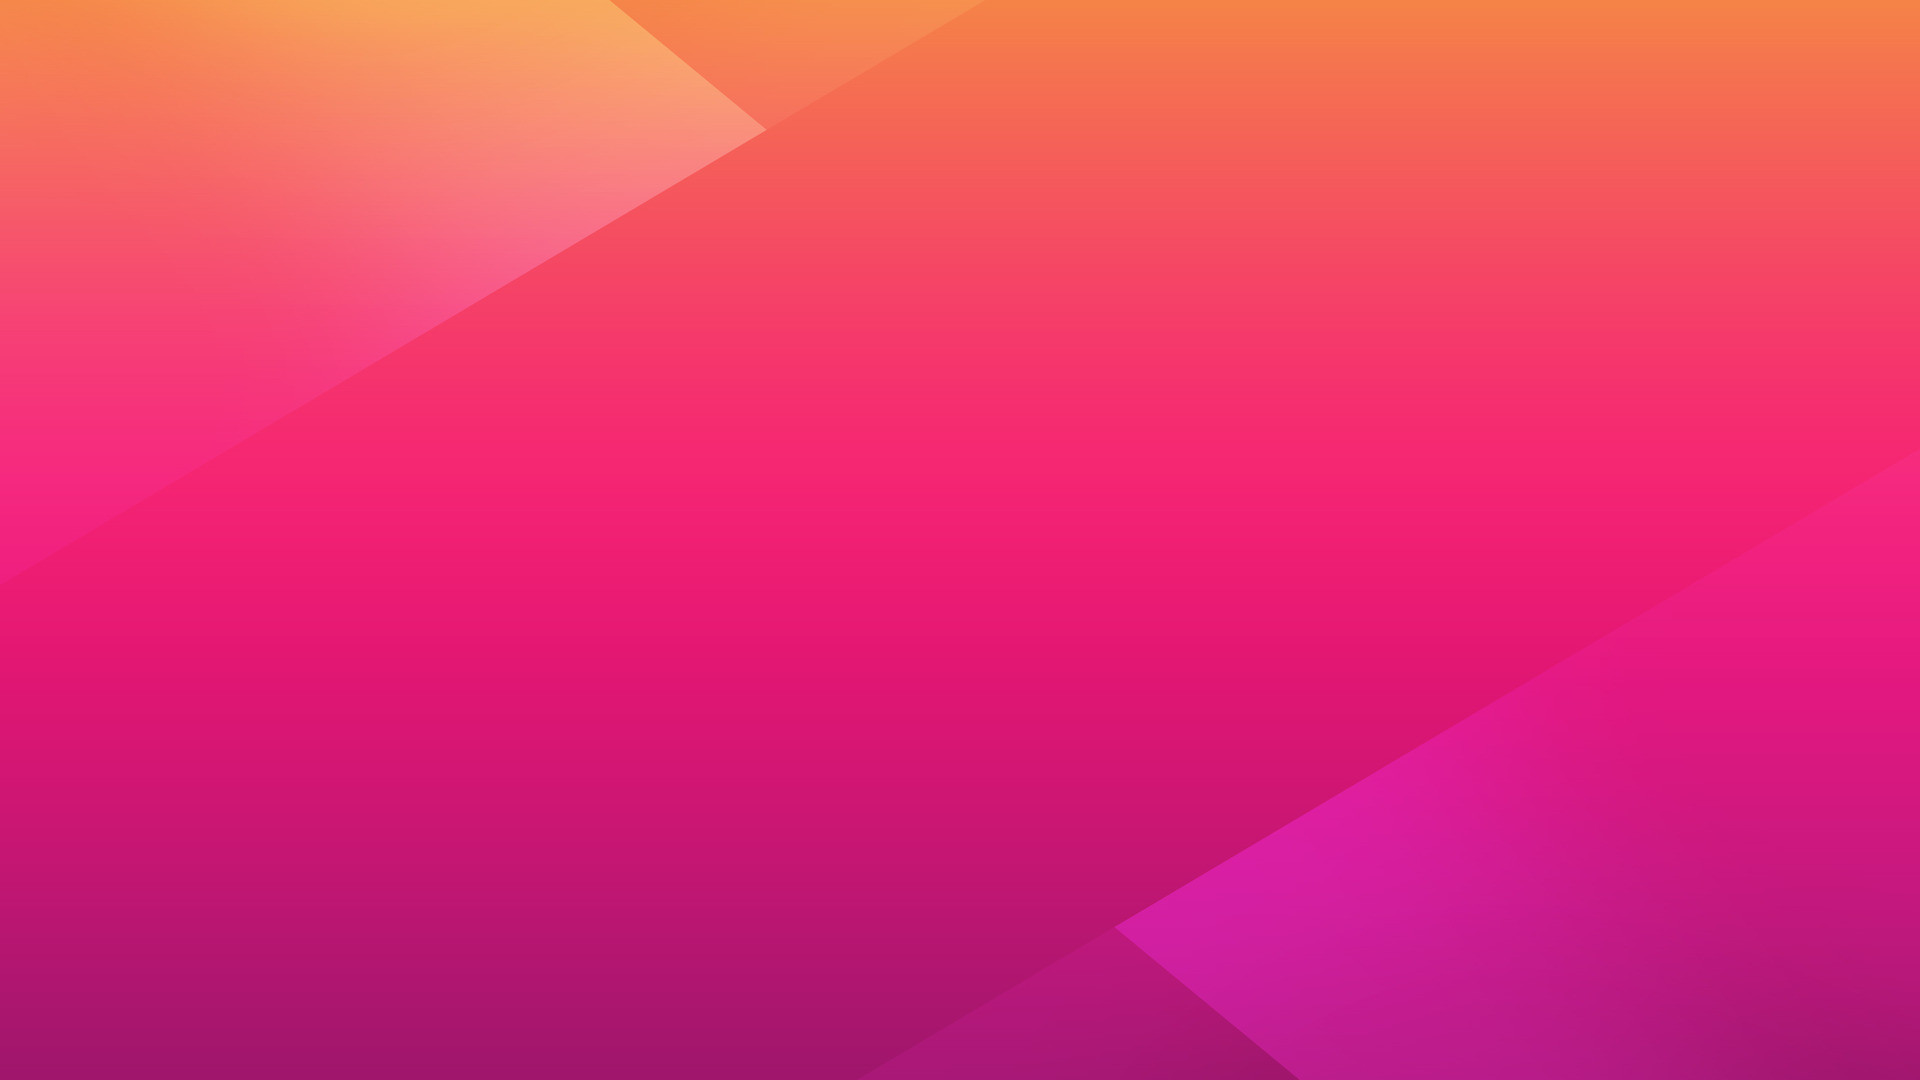 1920x1080 Pink tiles and gradient HD Wallpaper  Pink ...